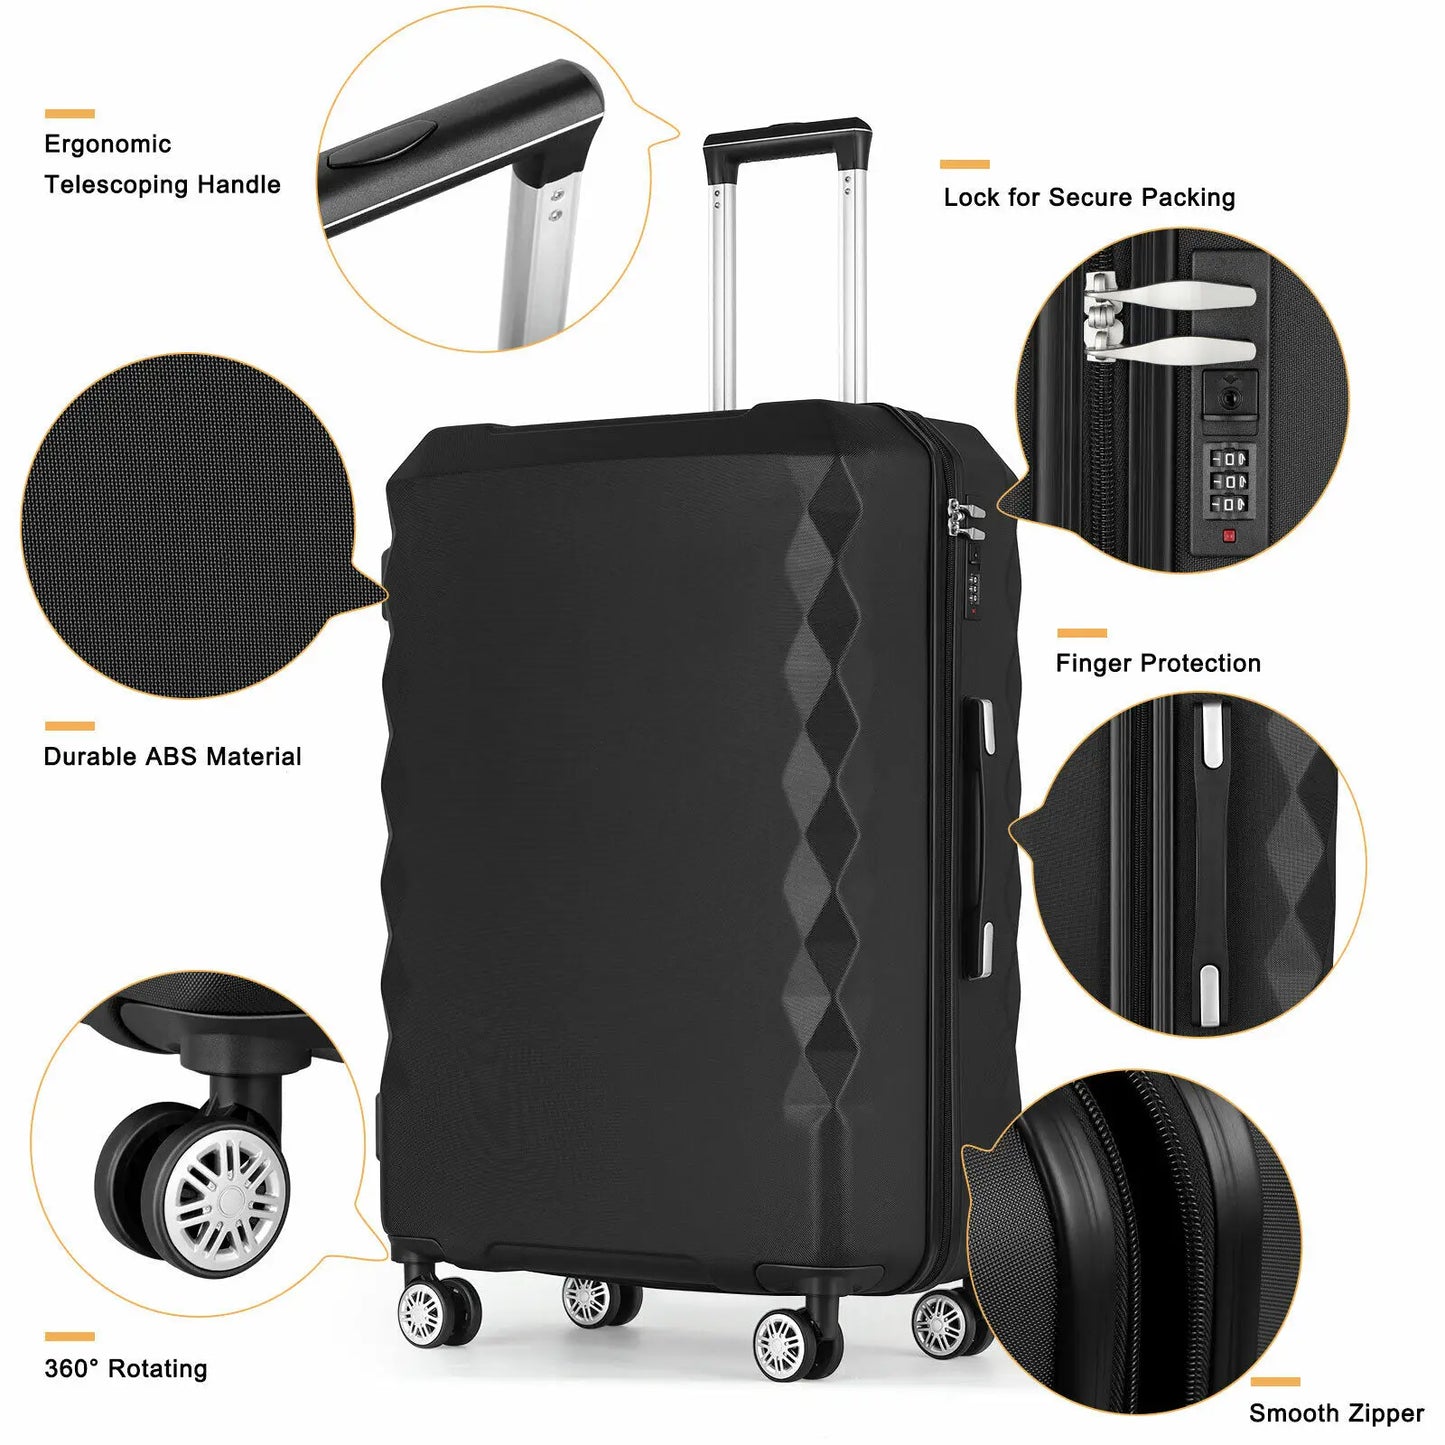 3PC Hardside Luggage Set with Spinner Wheels